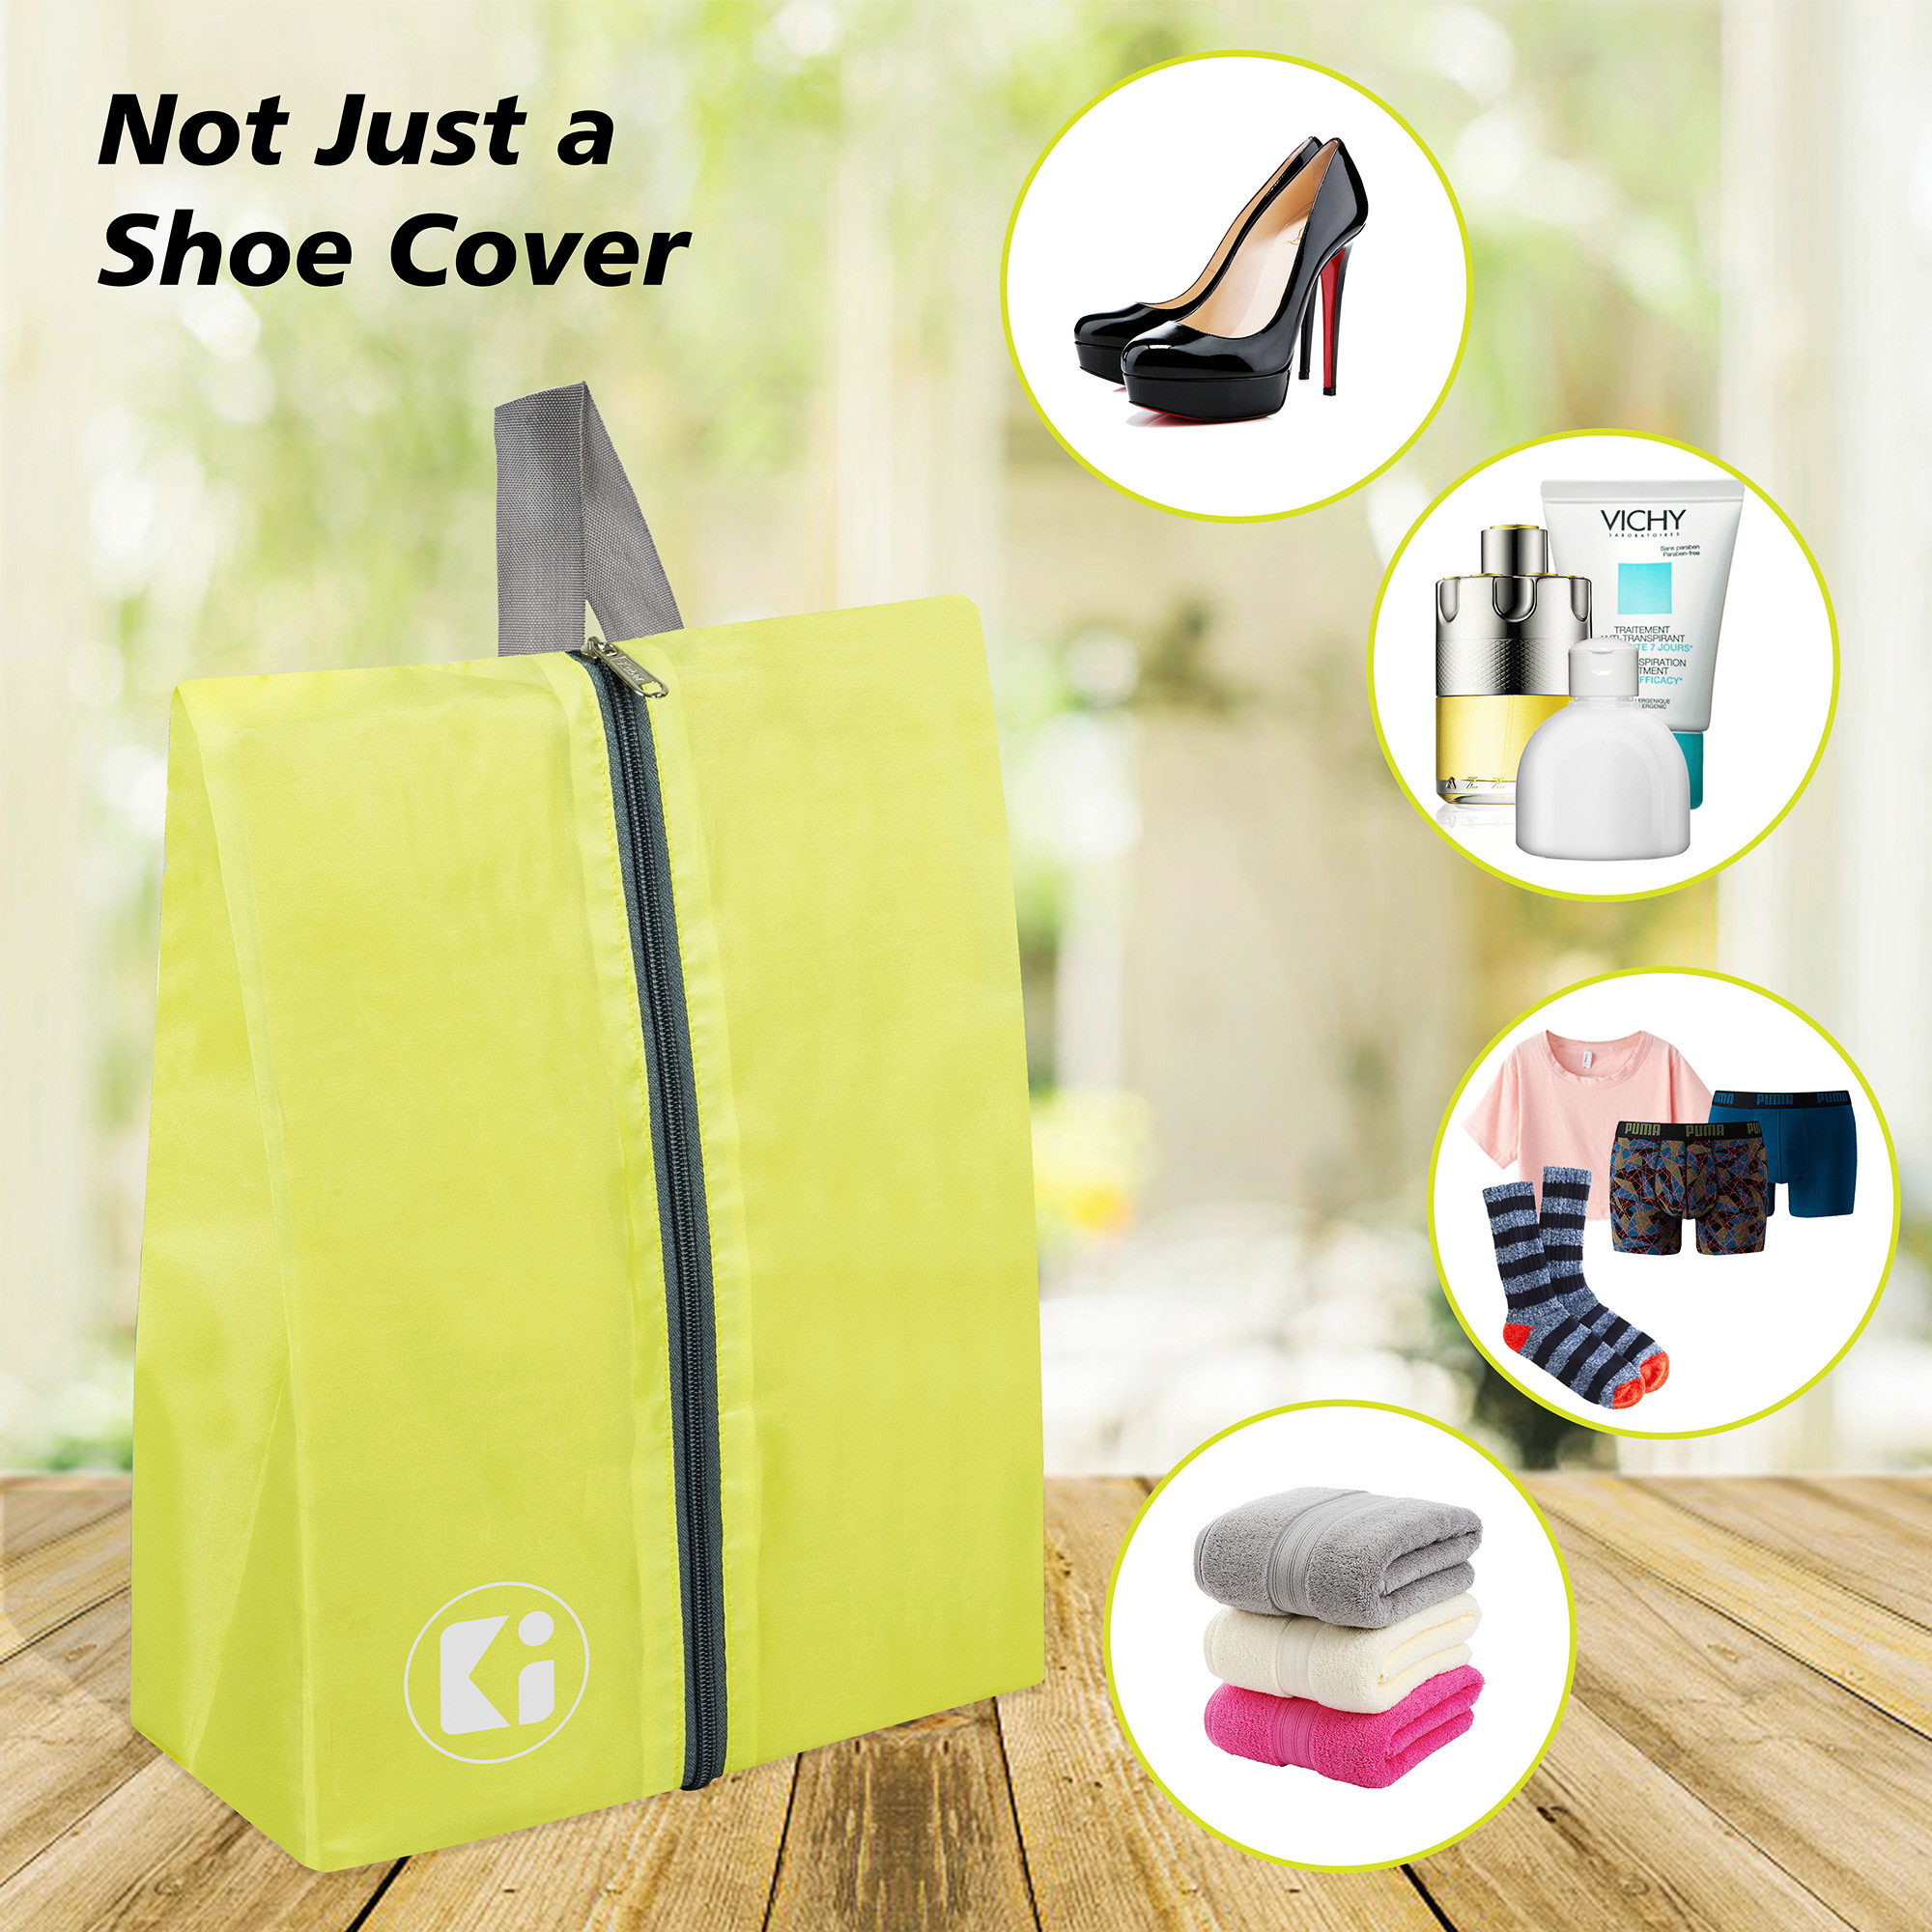 Kuber Industries Travel Organizer | Travel Shoe Carrying Bag | Toiletry Pouch with Zipper | Shoe Cover for Travel-Adventure | Multipurpose Storage Organizer Bag | Yellow & Gray